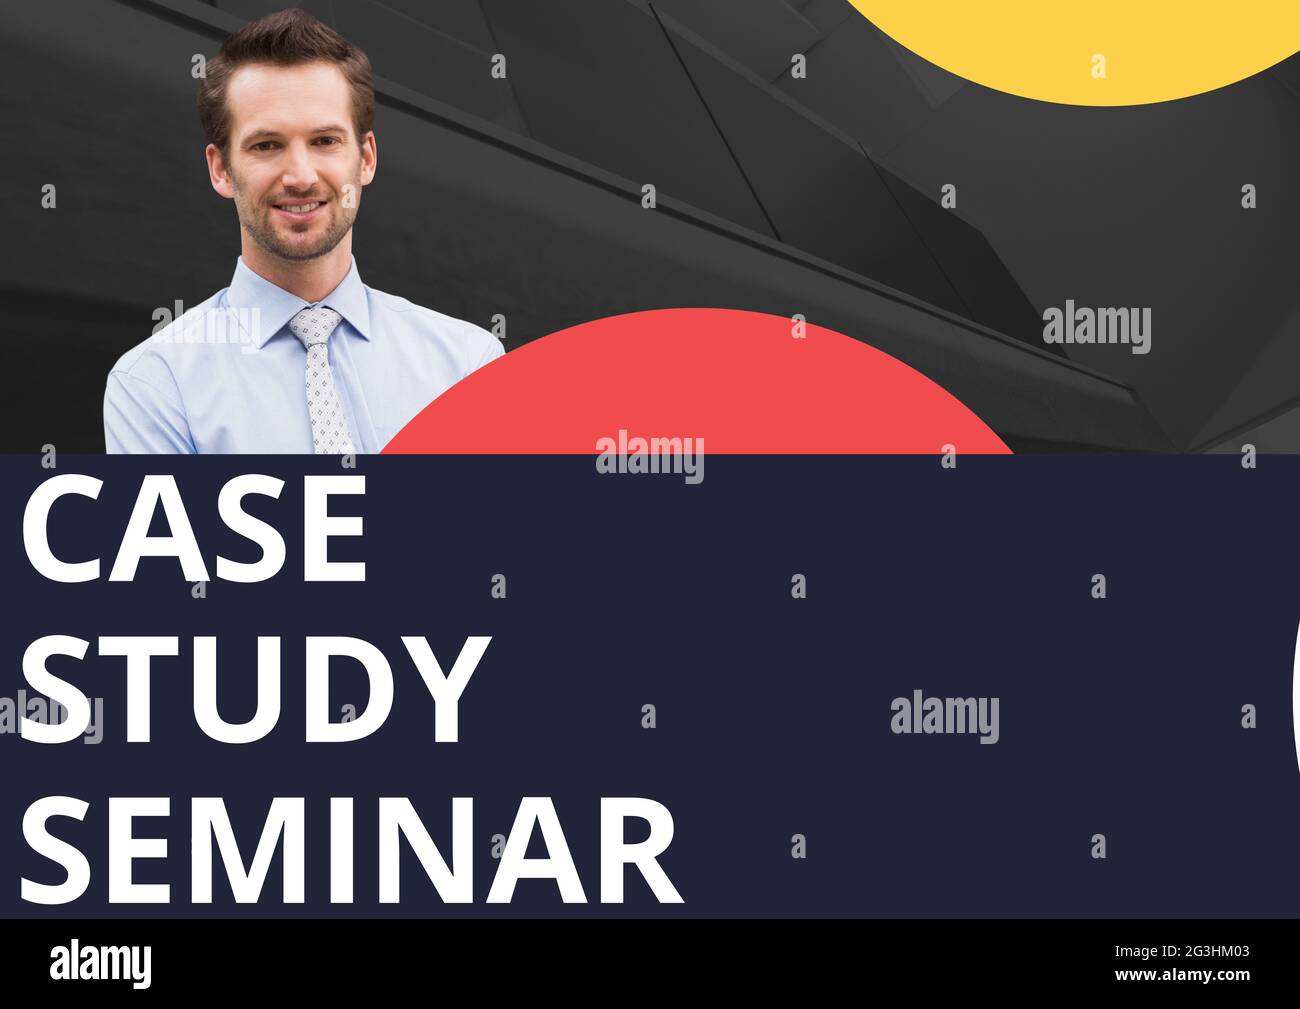 Composition of case study seminar text with smiling man and red and yellow circles, on black Stock Photo